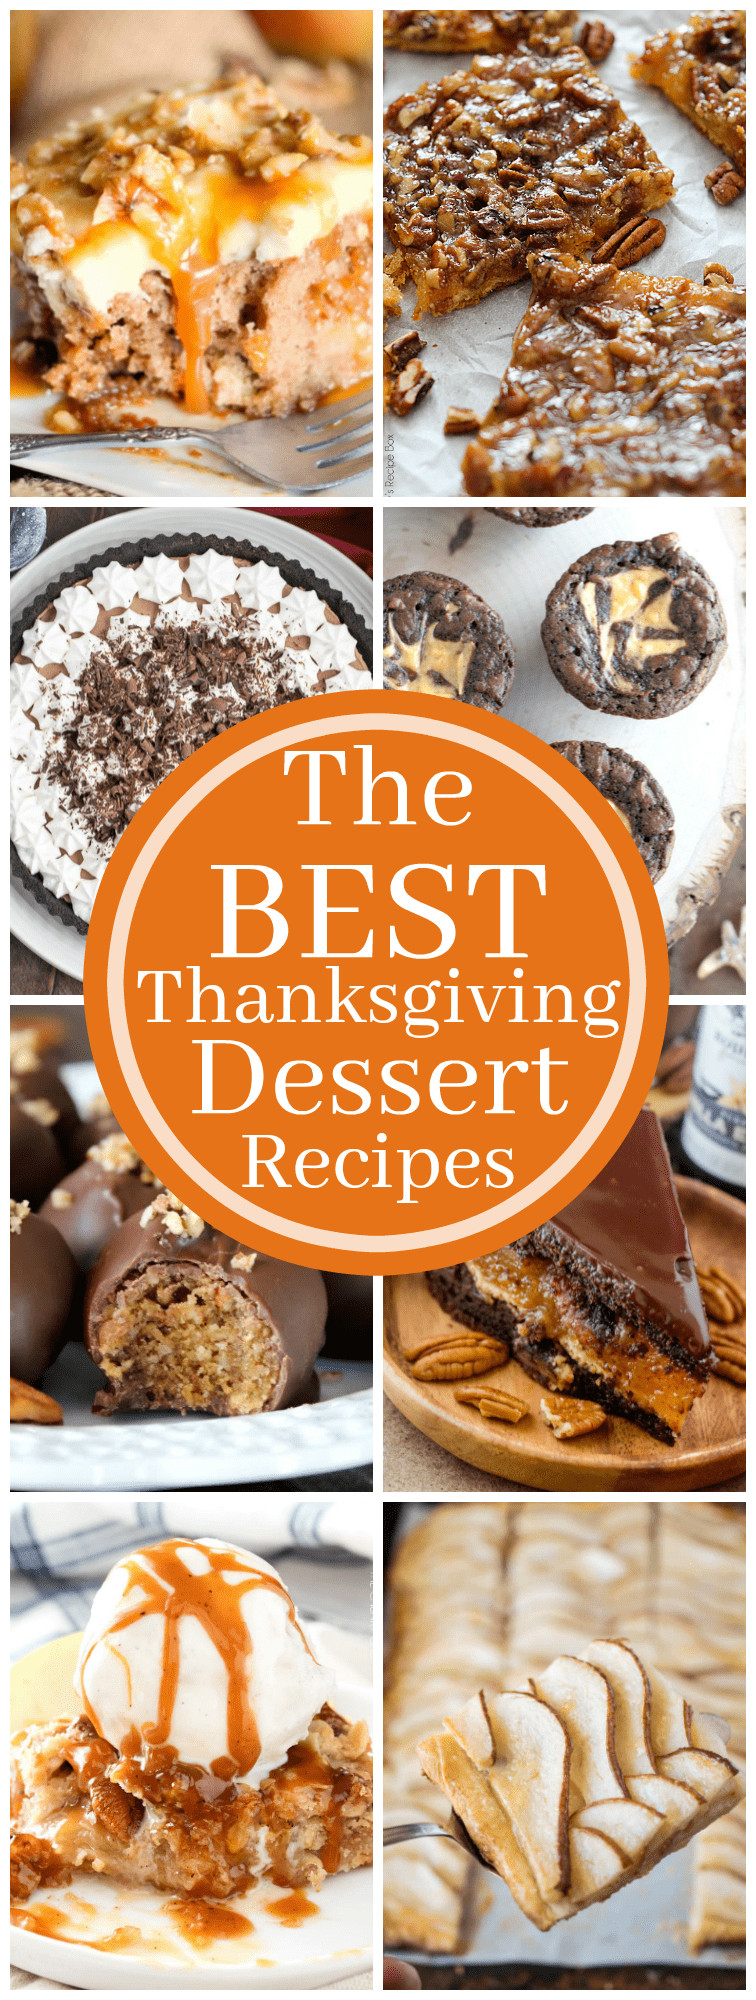 Best Recipe For Thanksgiving
 15 of the Best Thanksgiving Desserts Yummy Healthy Easy